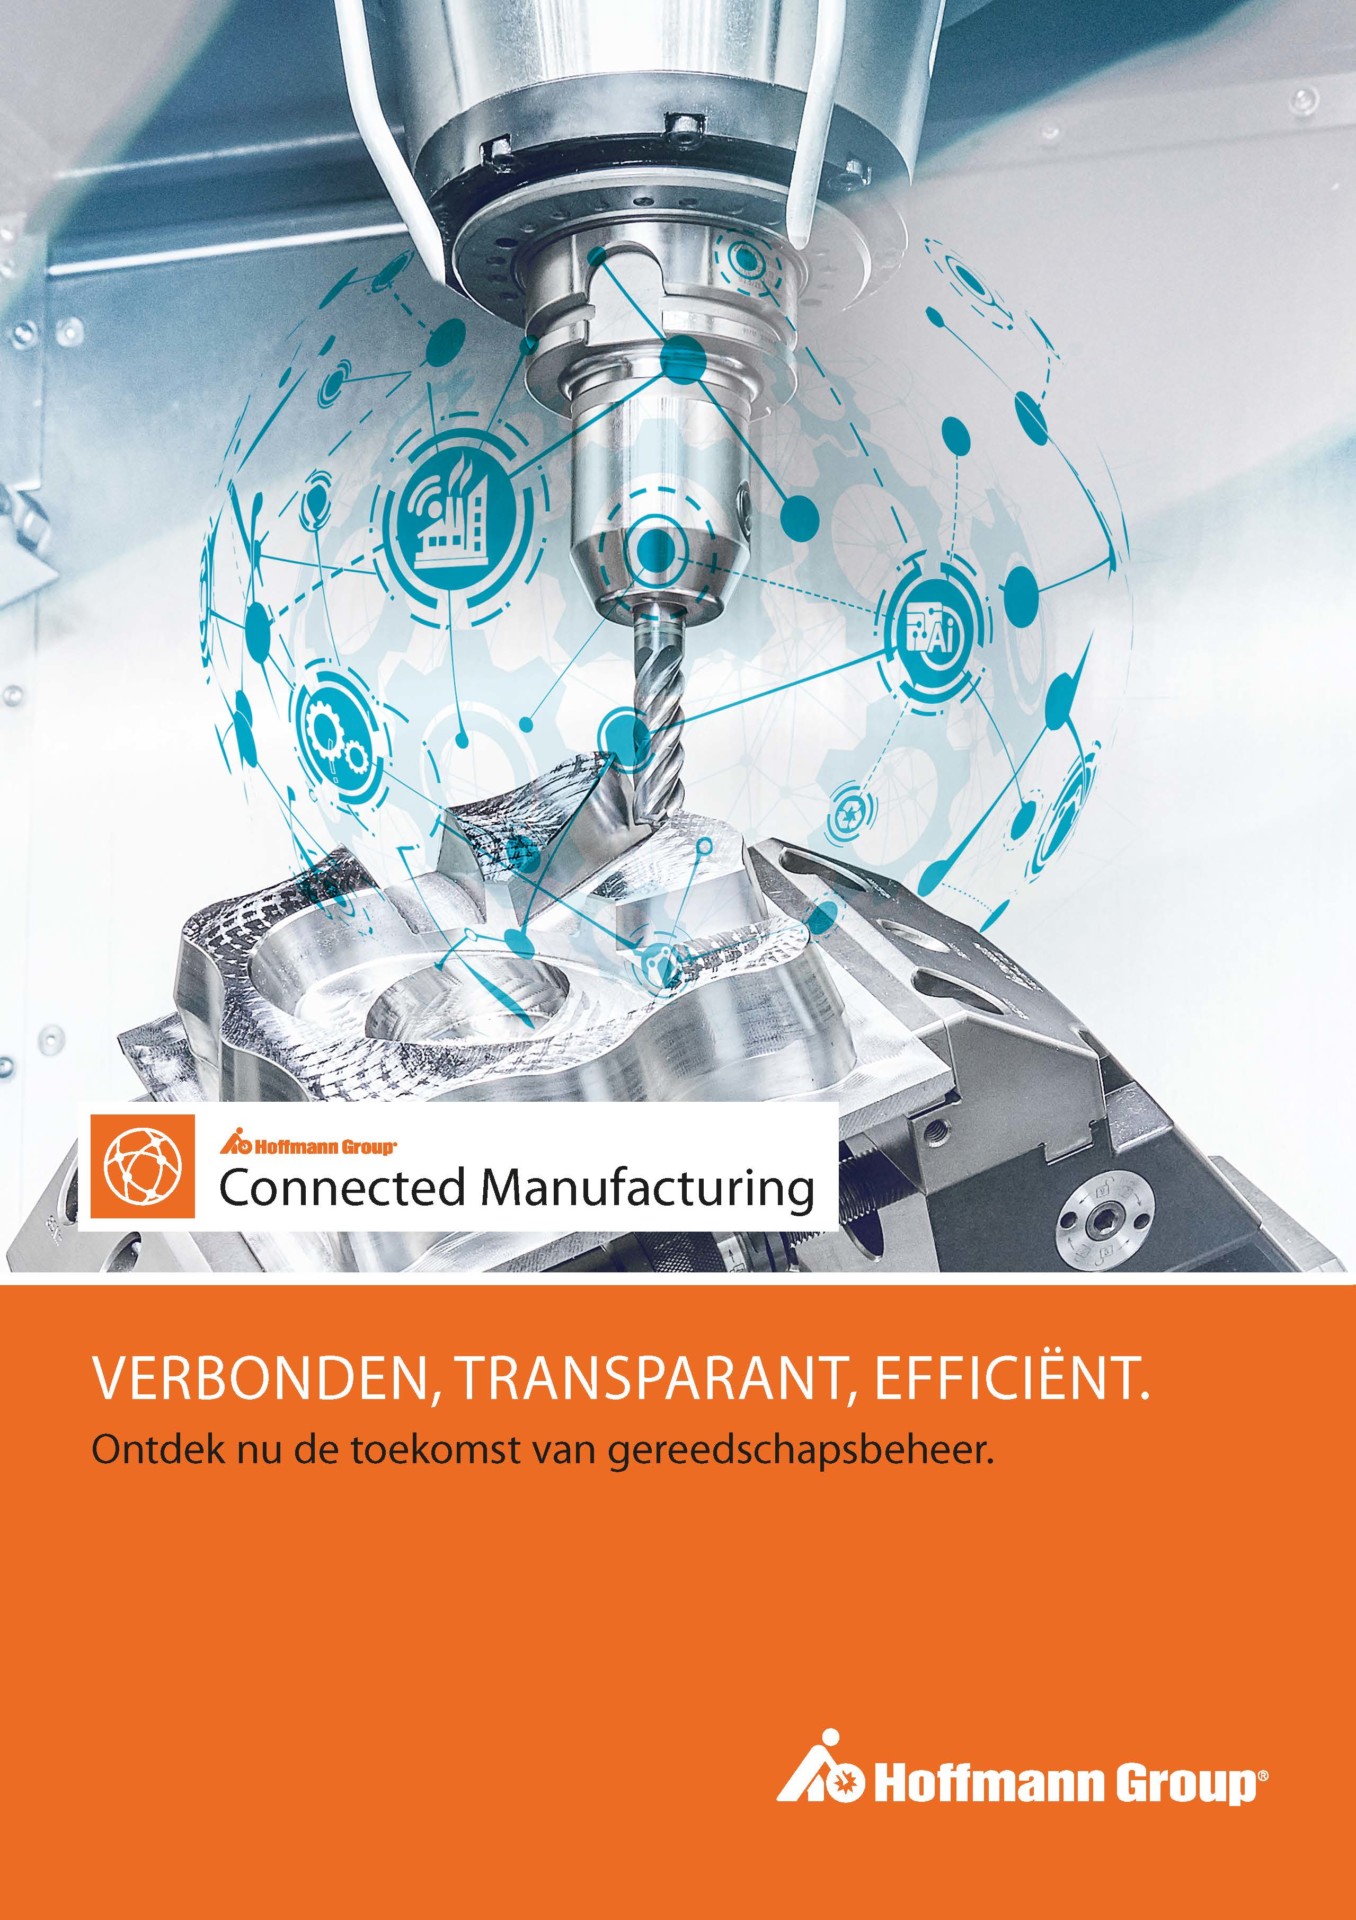 VP_Connected-Manufacturing_Hoffmann-Group_NL